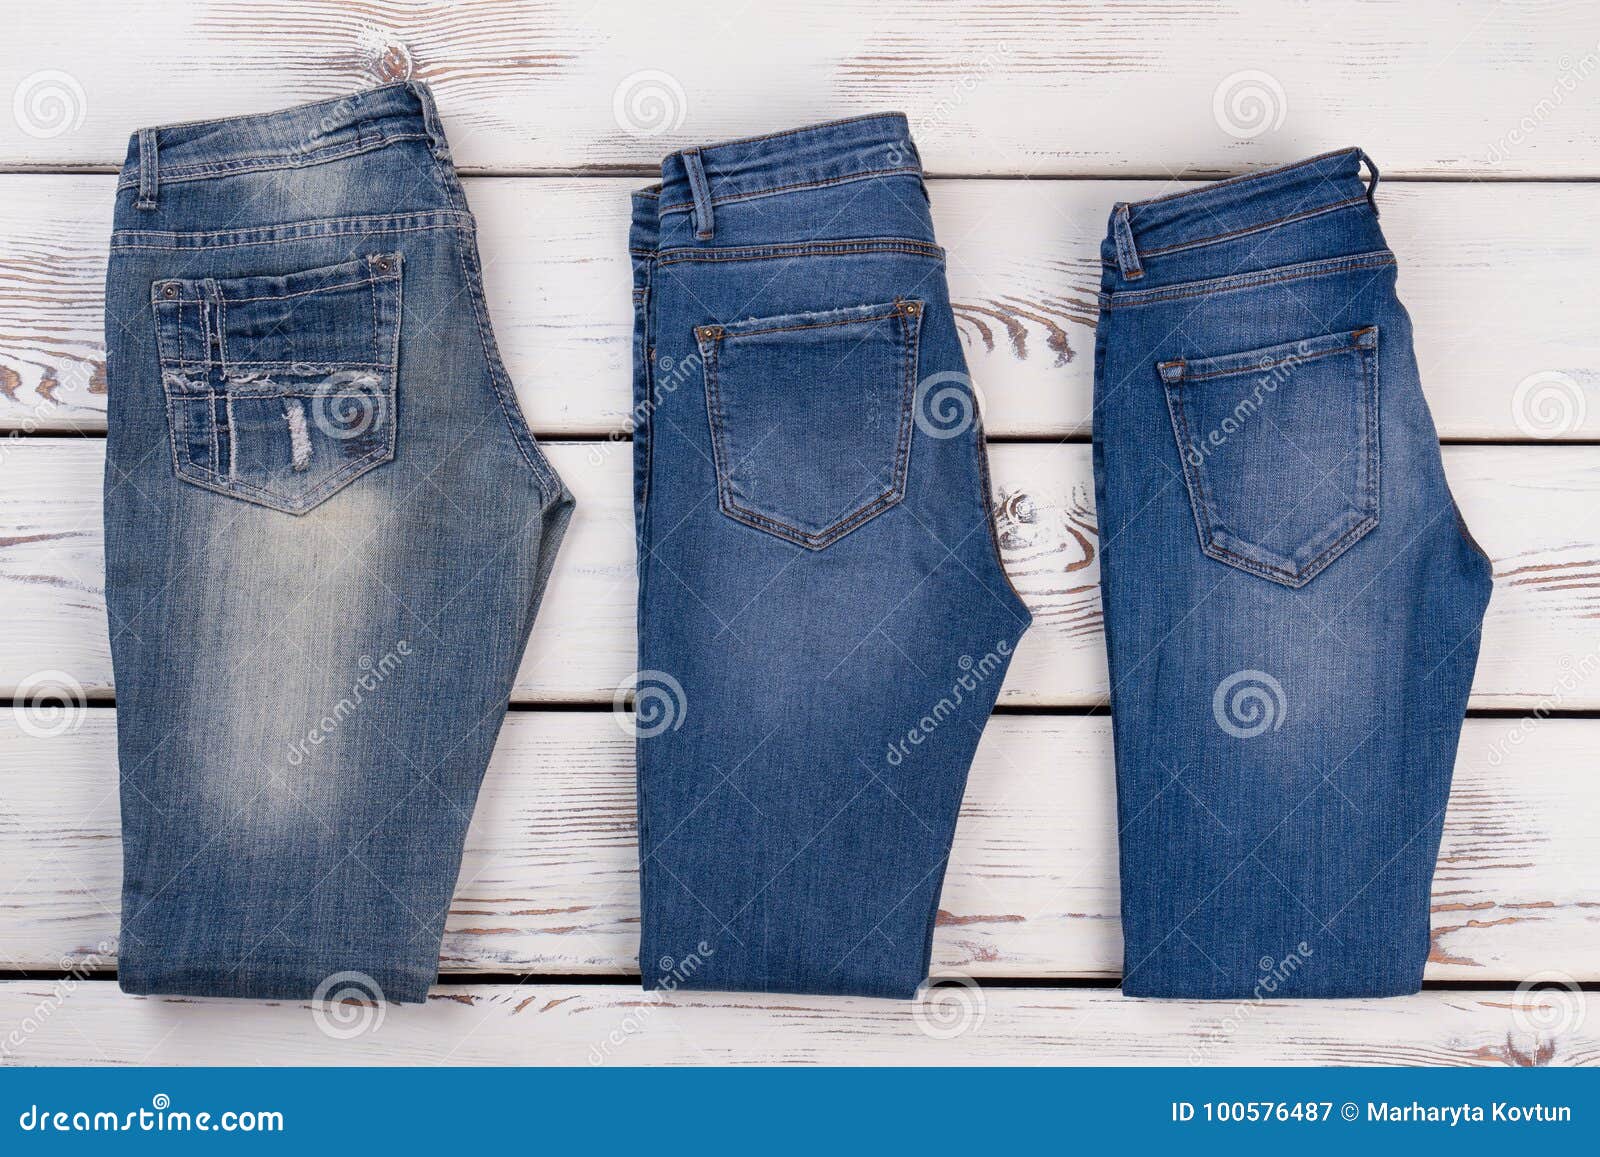 Trousers Size Chart and Trousers Size Conversion - Men & Women | Types of  jeans, Women jeans, Fashion vocabulary